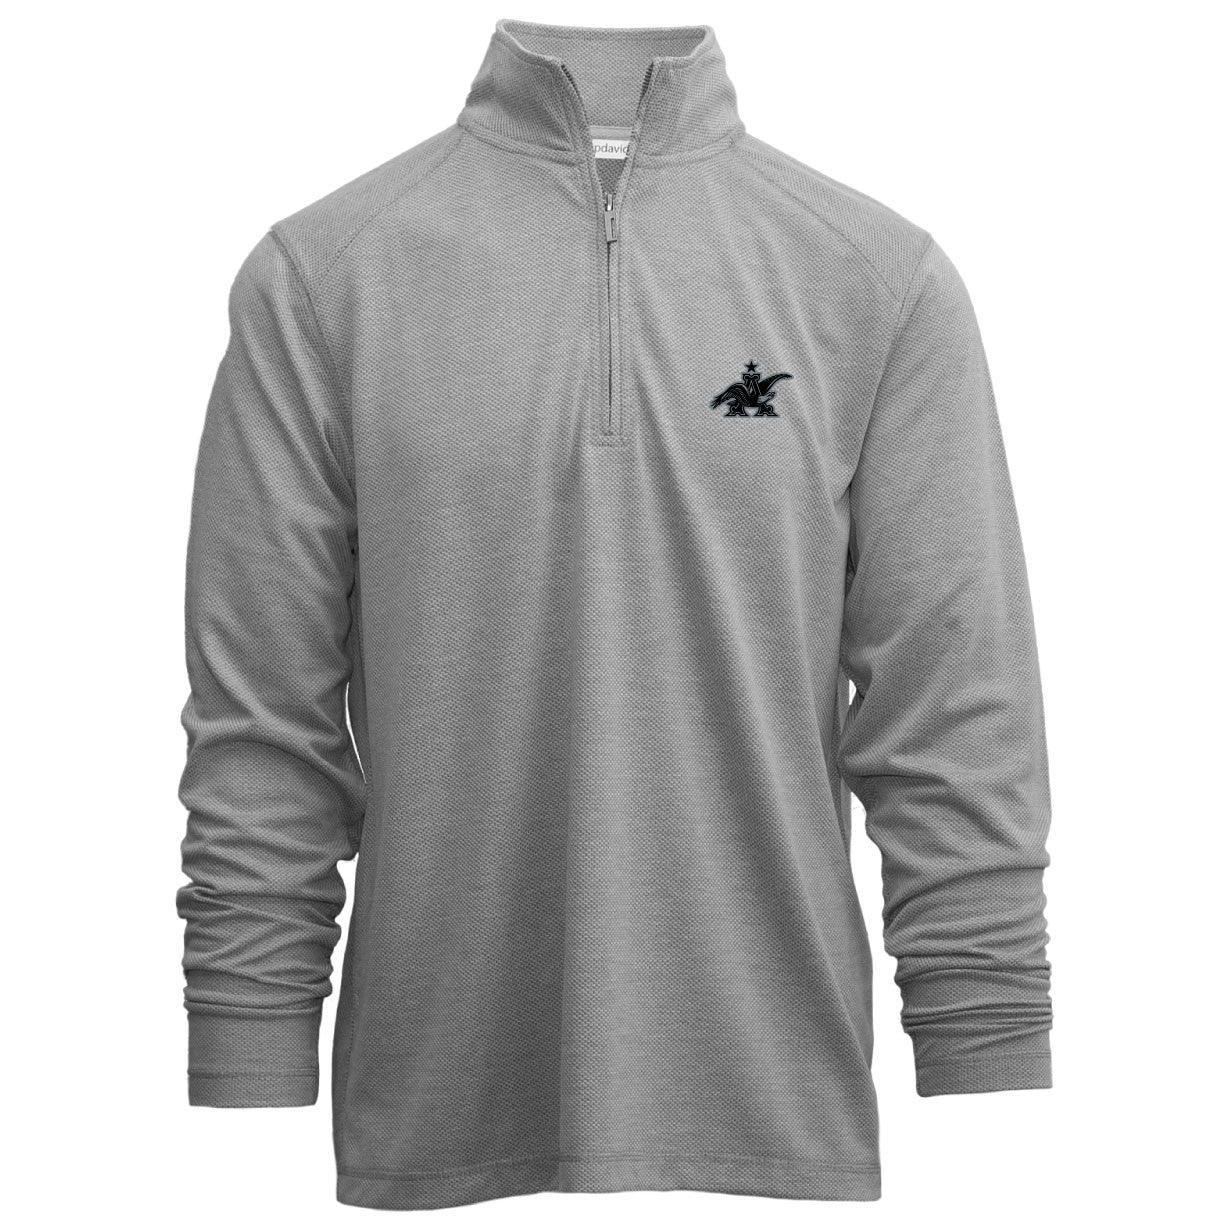 Grey 1/4 zip pullover with all black A&Eagle embroidered logo on front left chest